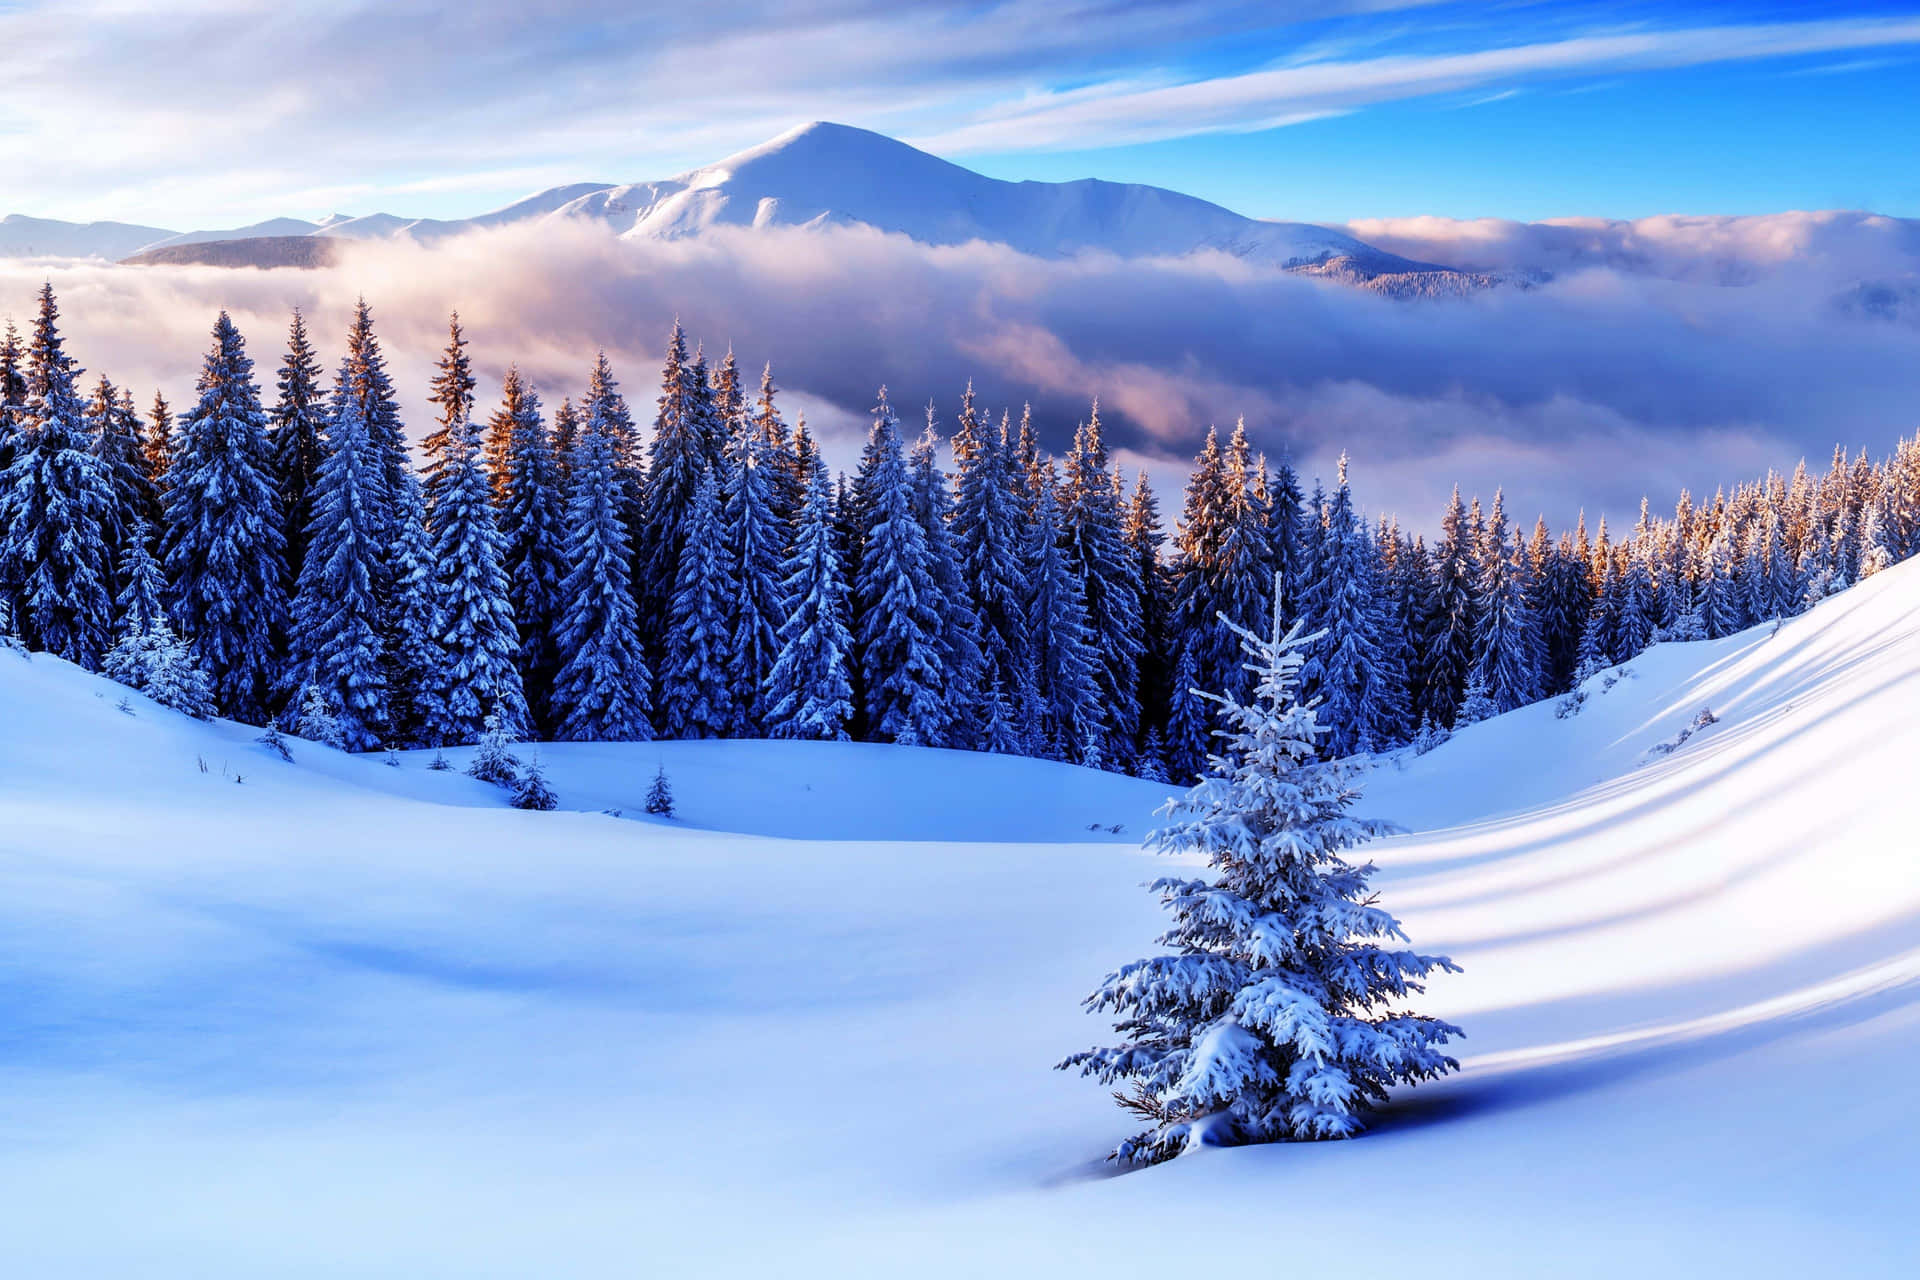 Enjoy the beauty of winter in nature.